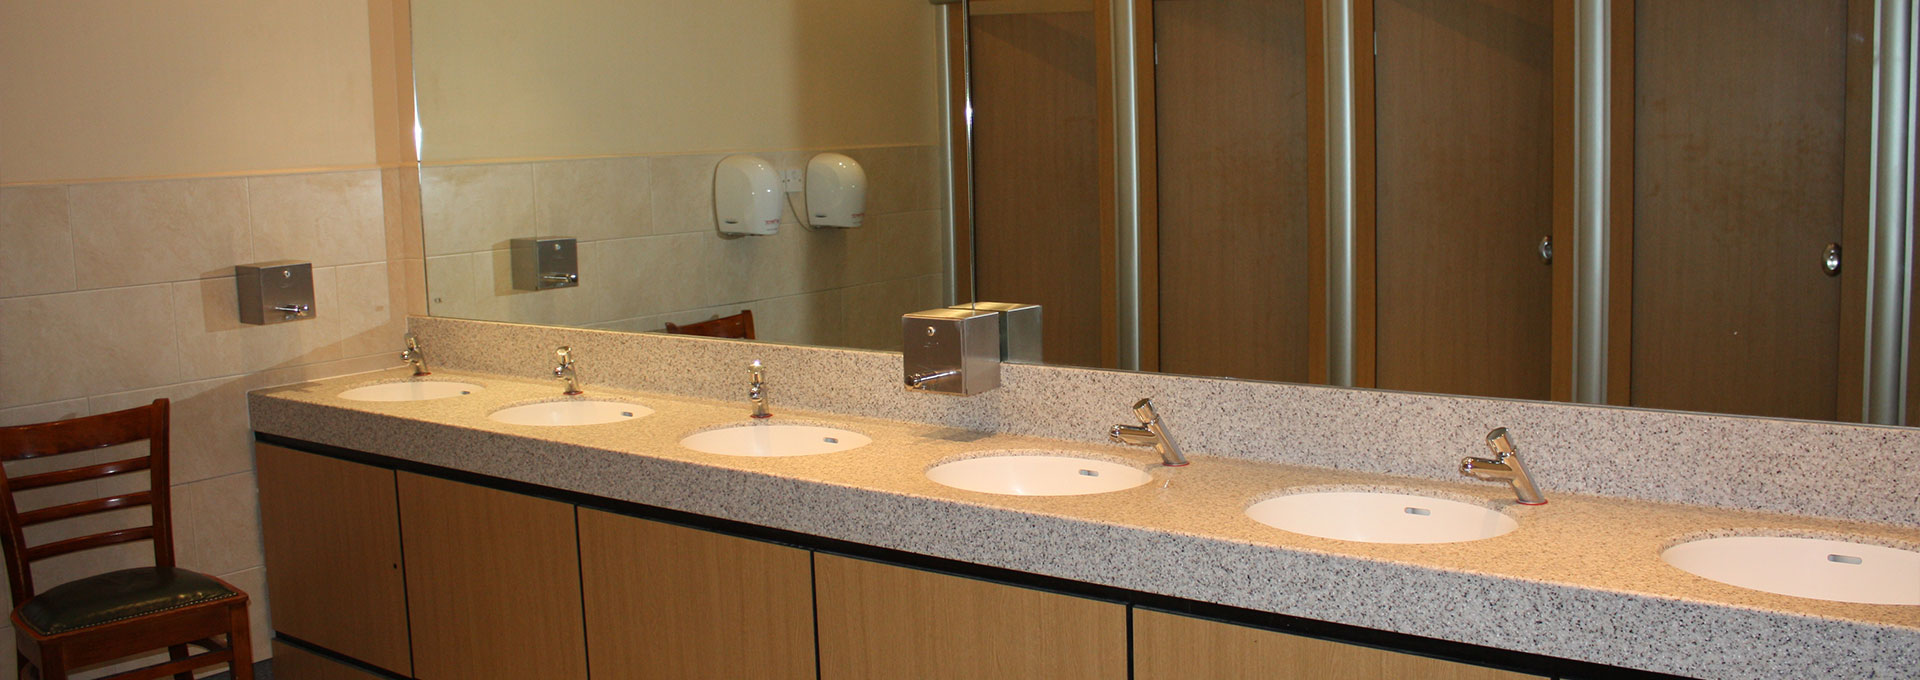 Commercial - Office & Retail washrooms